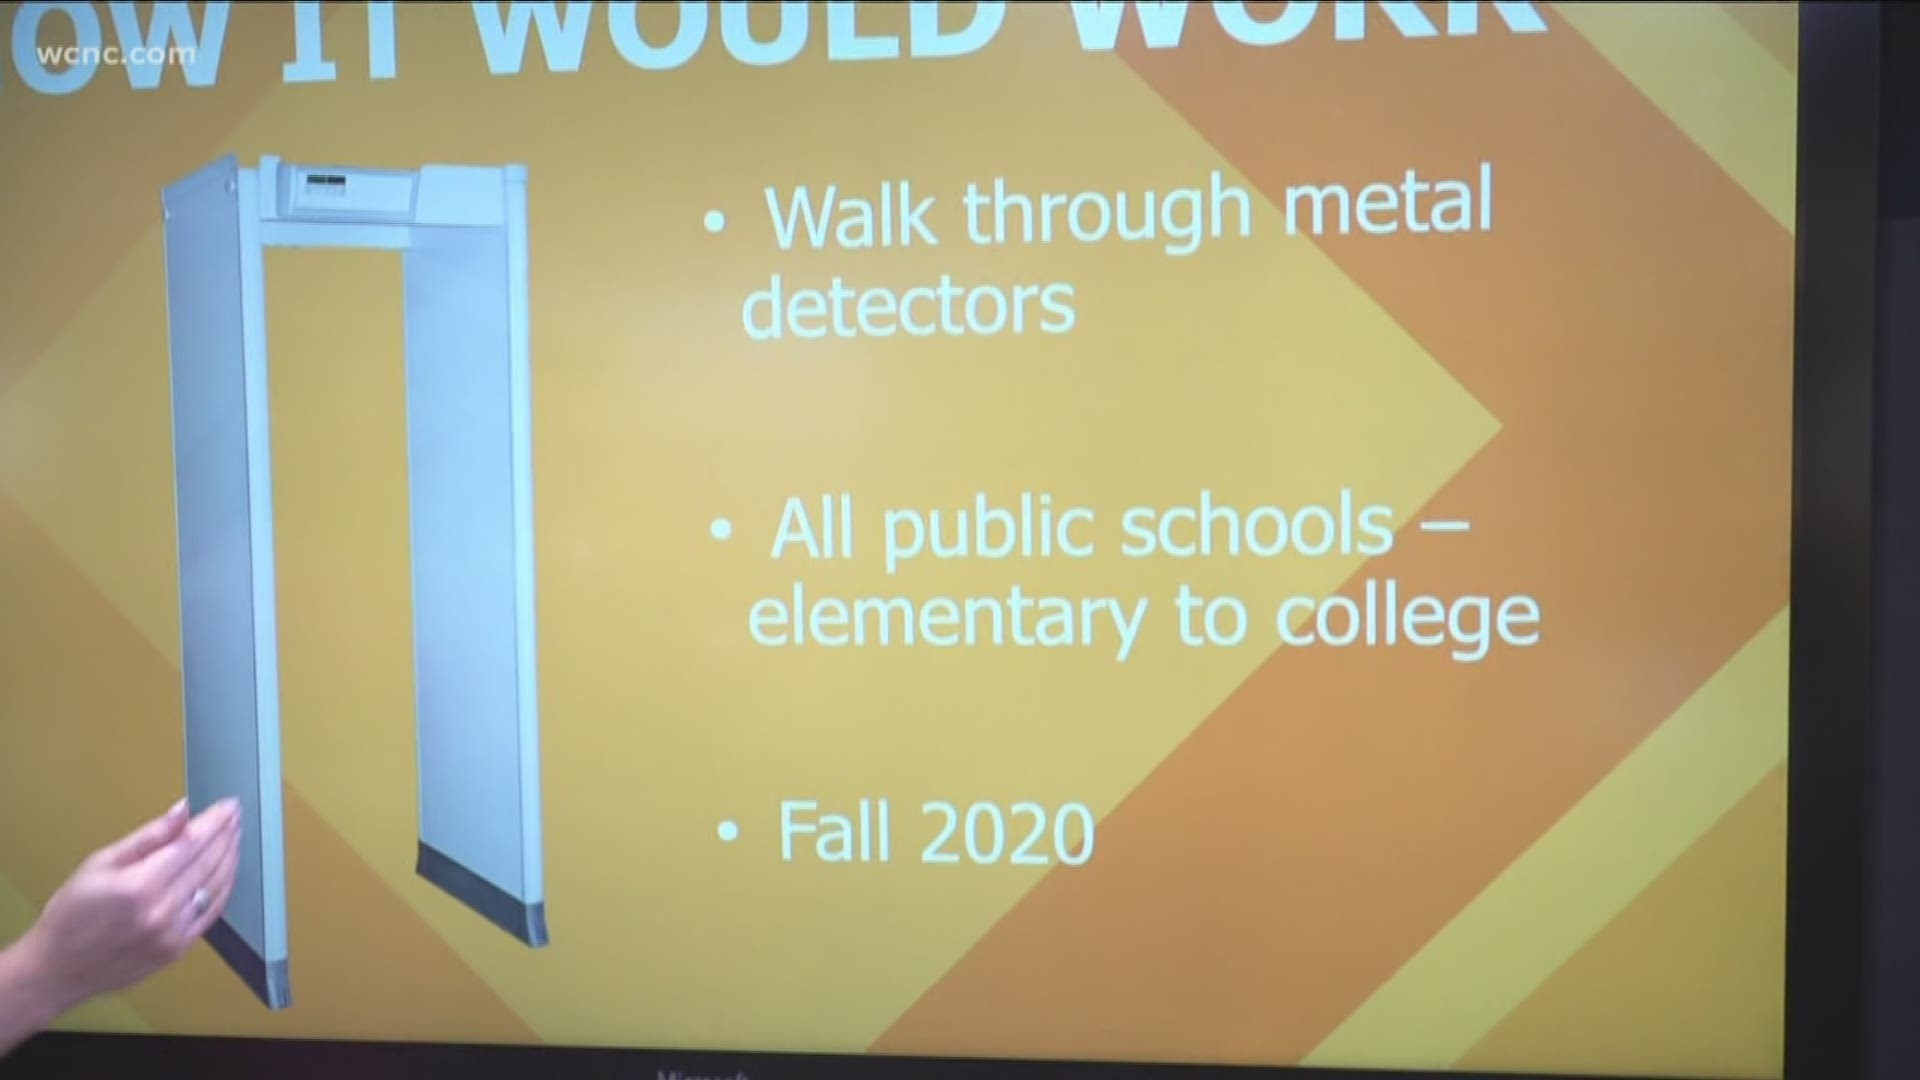 A bill filed by South Carolina lawmakers would require walk-through metal detectors in all public schools starting in the fall of 2020.